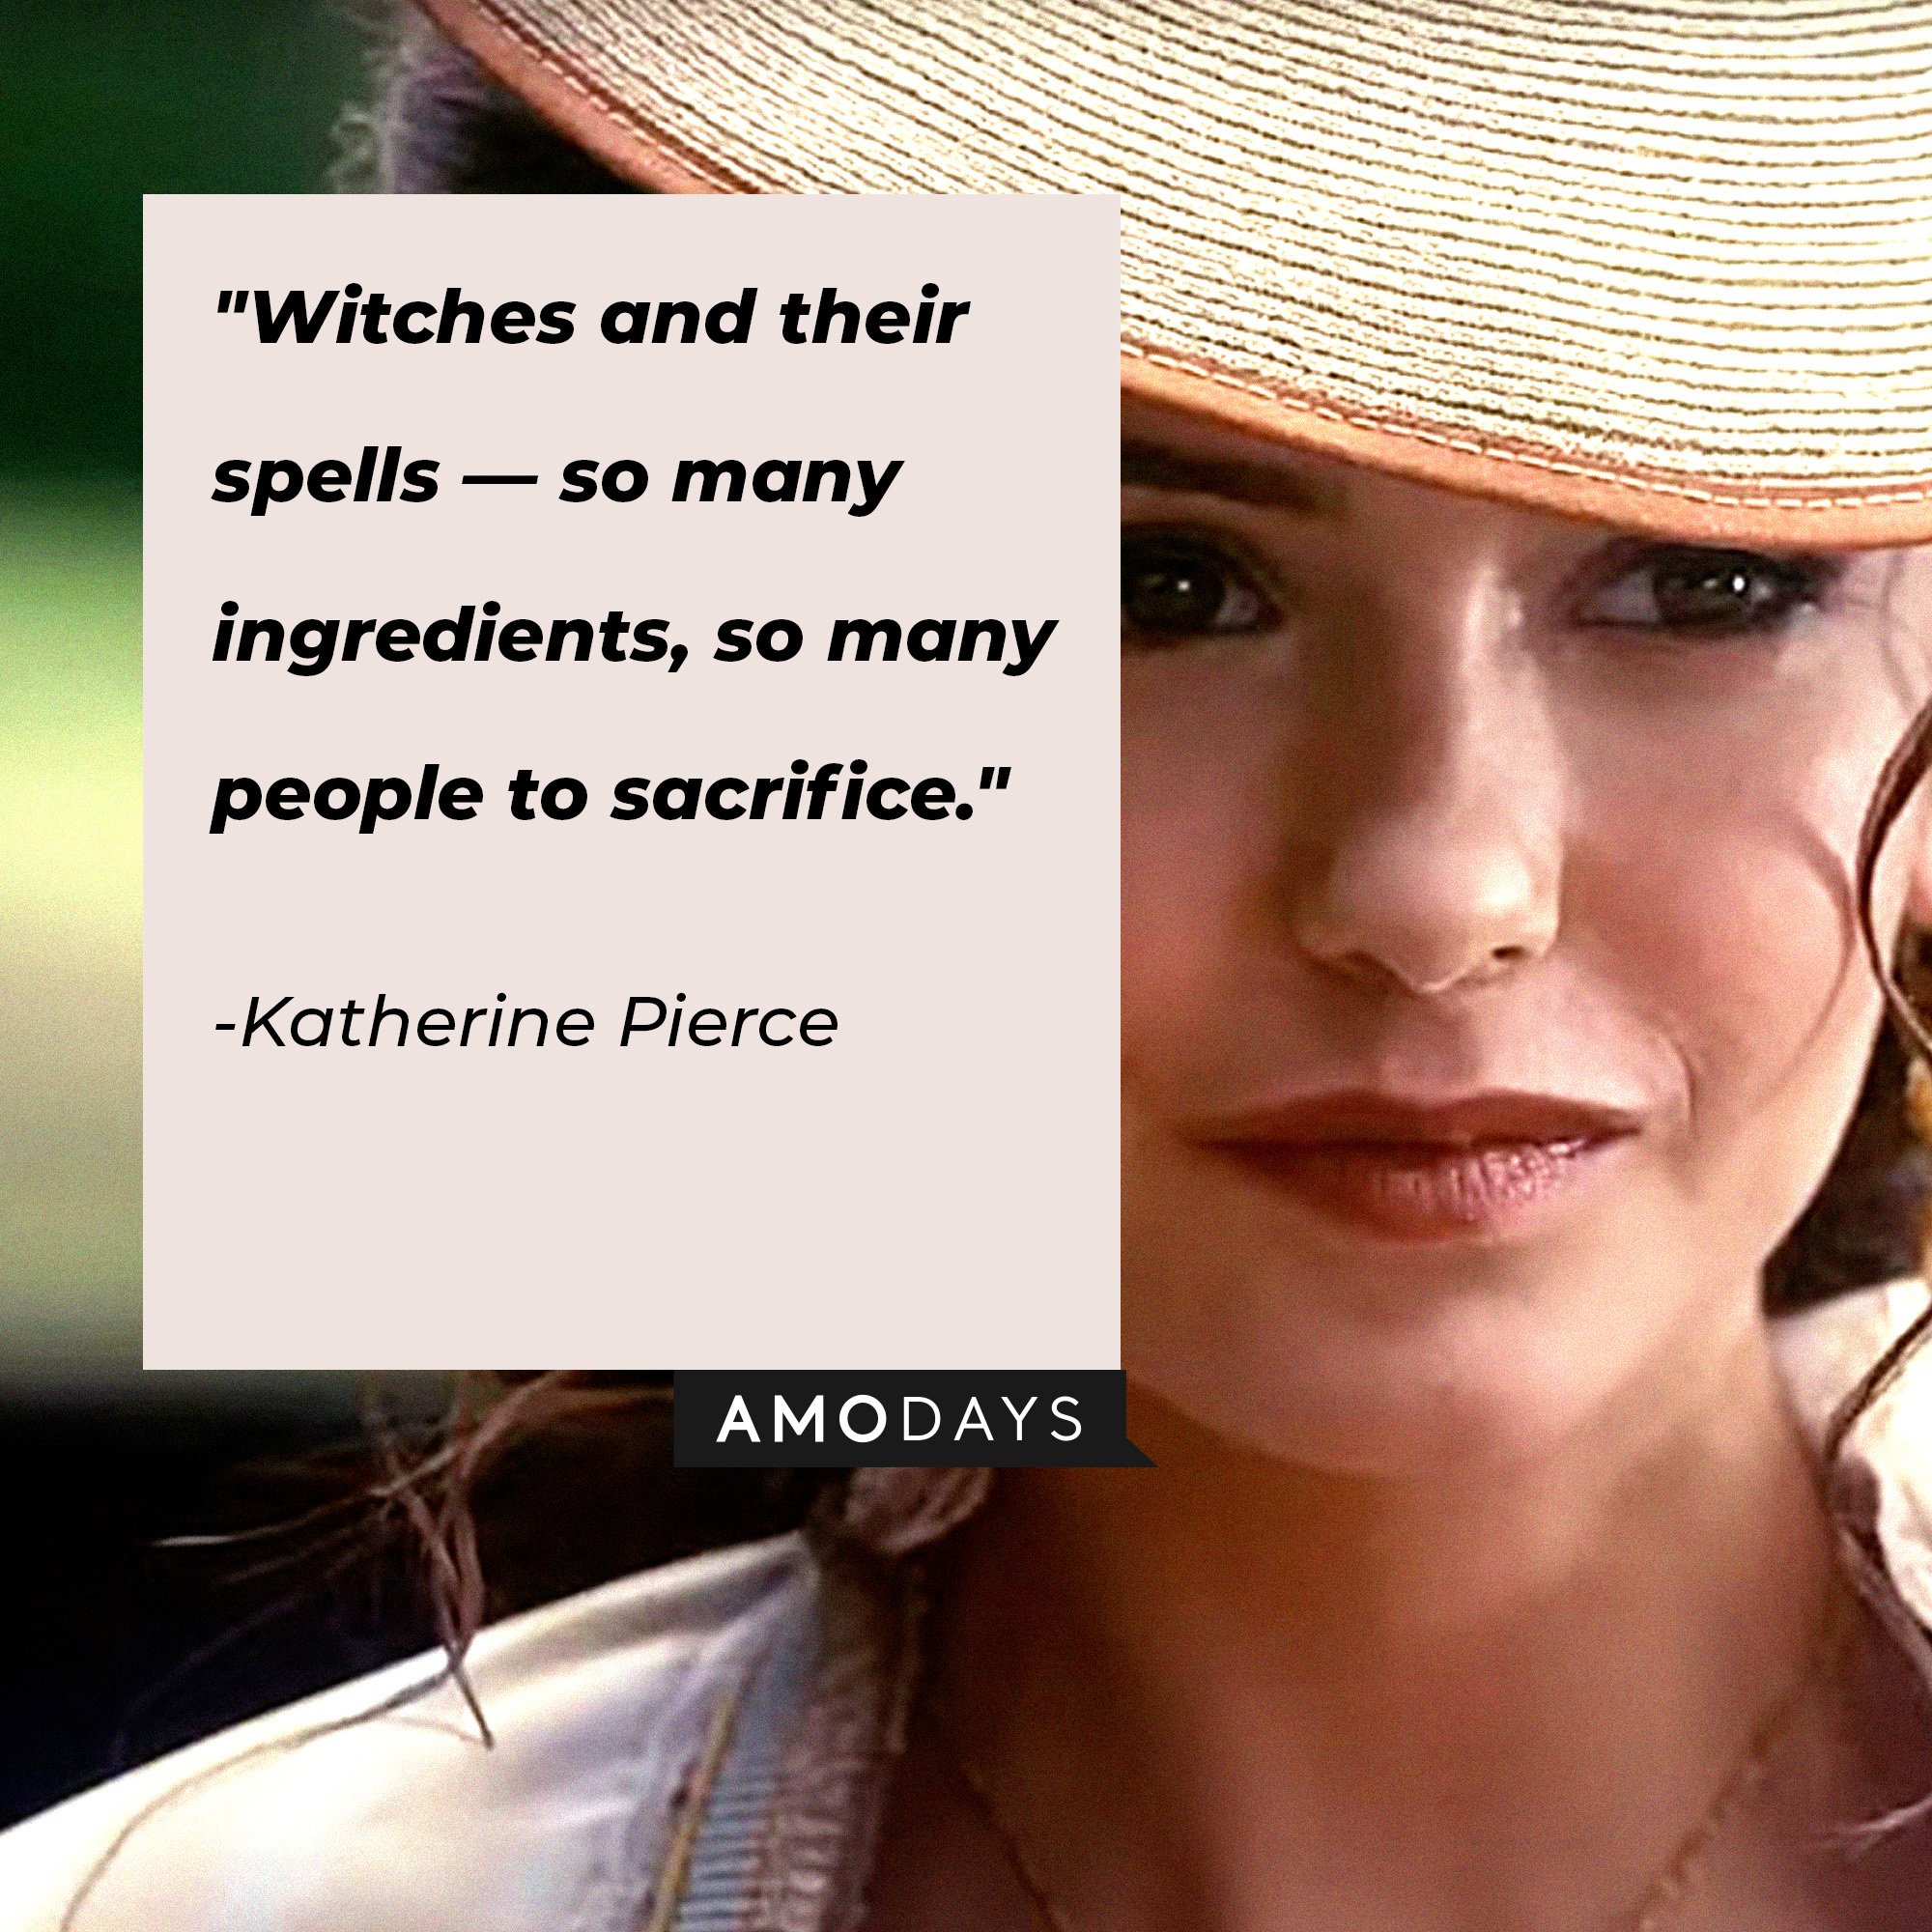 Katherine Pierce's quote: "Witches and their spells — so many ingredients, so many people to sacrifice." | Image: AmoDays